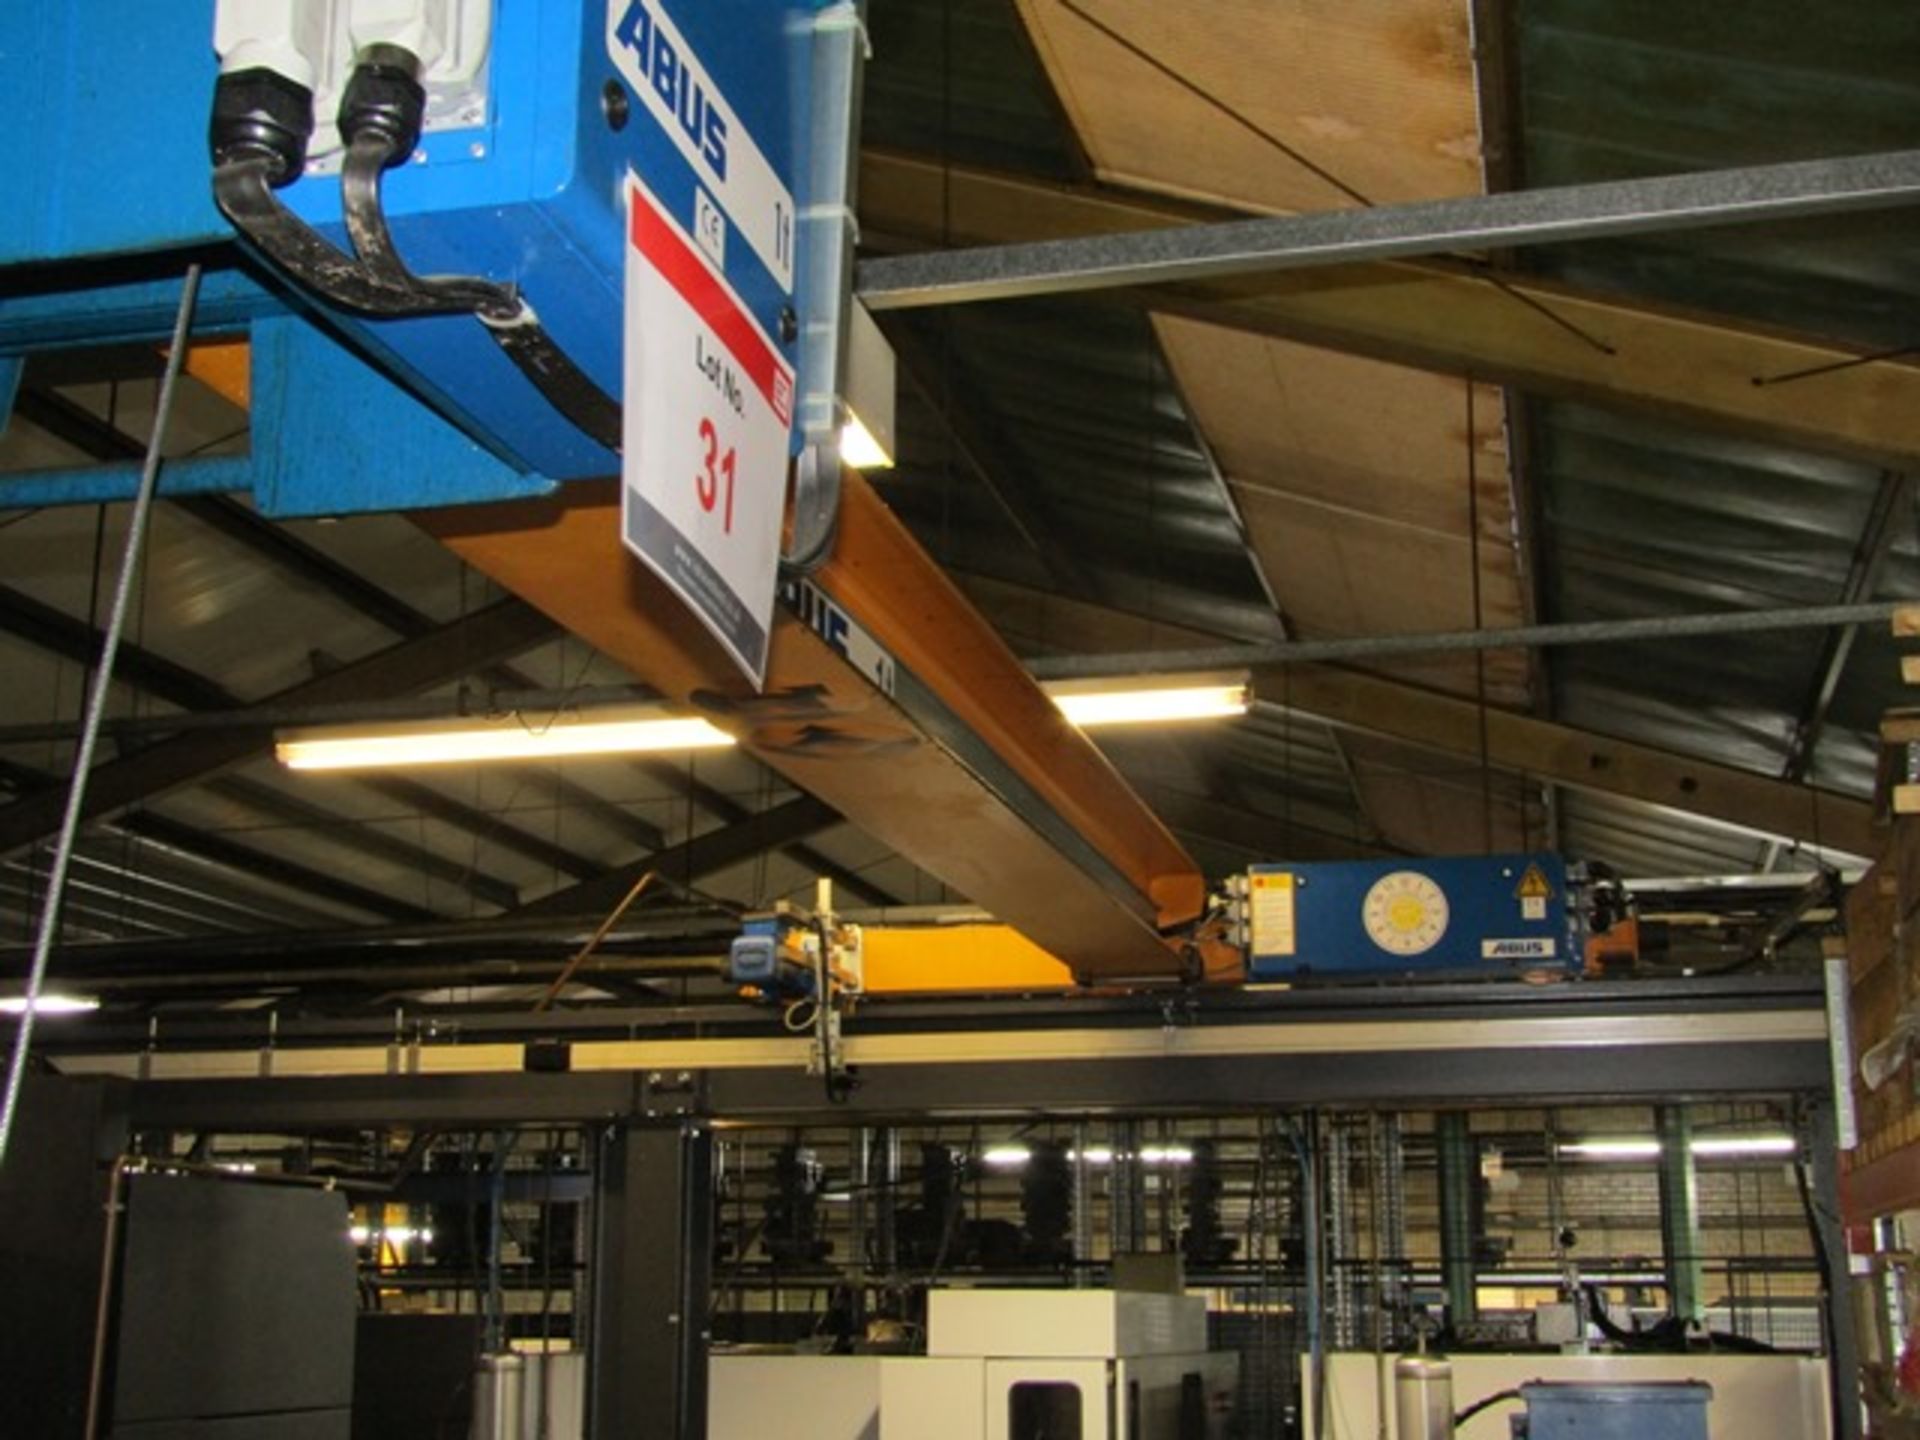 Abus 1 ton overhead travelling electric gantry crane, serial no: 16258516-1, approx 5.5m span x